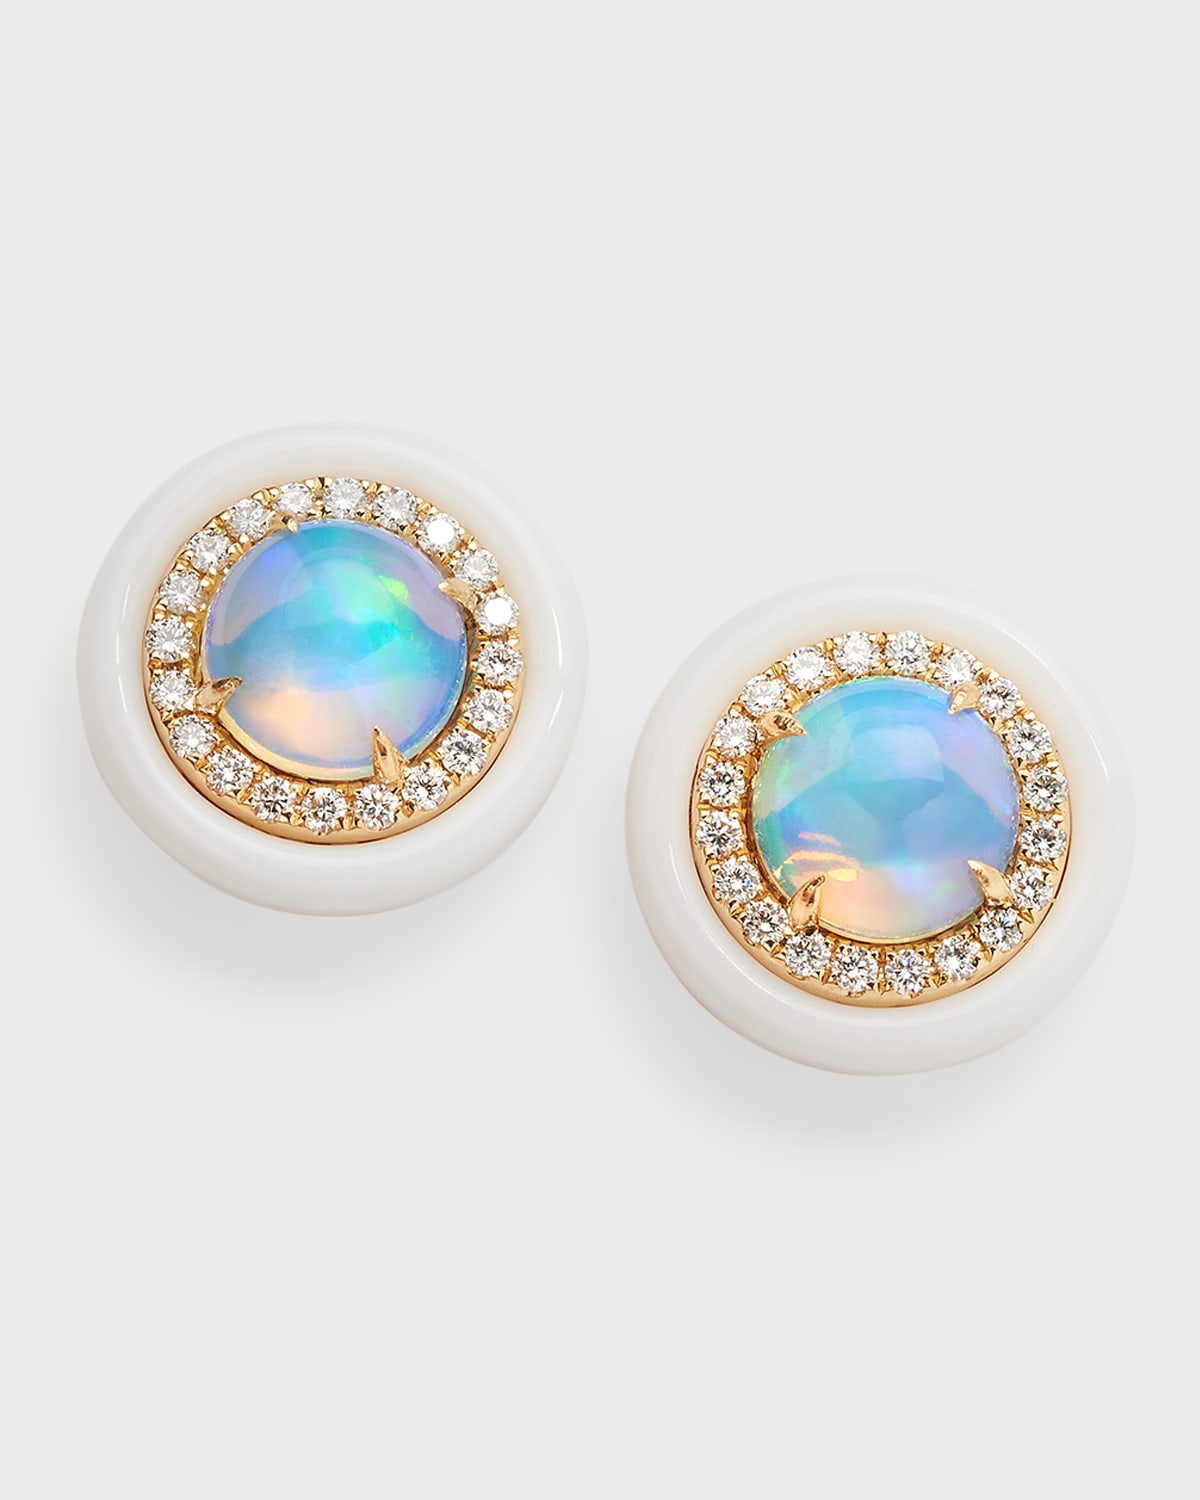 18K Yellow Gold Stud Earrings with Opal Rounds, Diamonds and White Frame, 2.31tcw